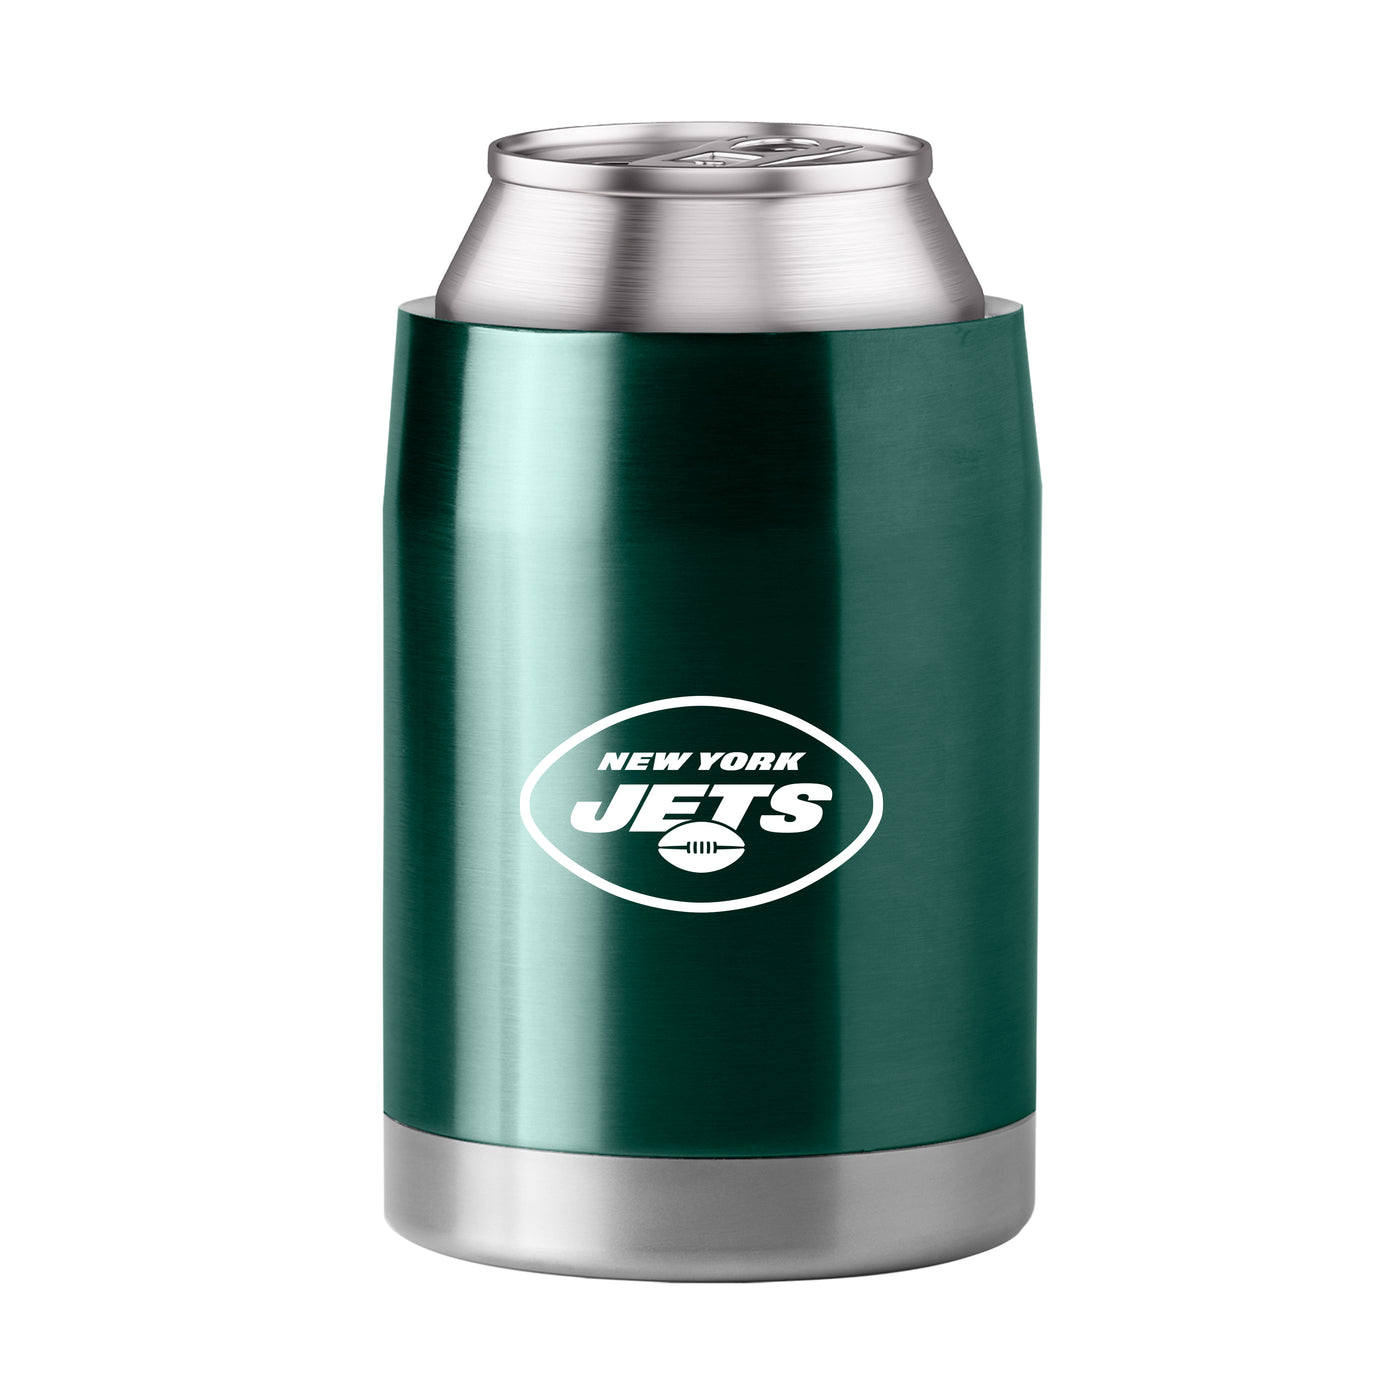 New York Jets Gameday 3-in-1 Coolie